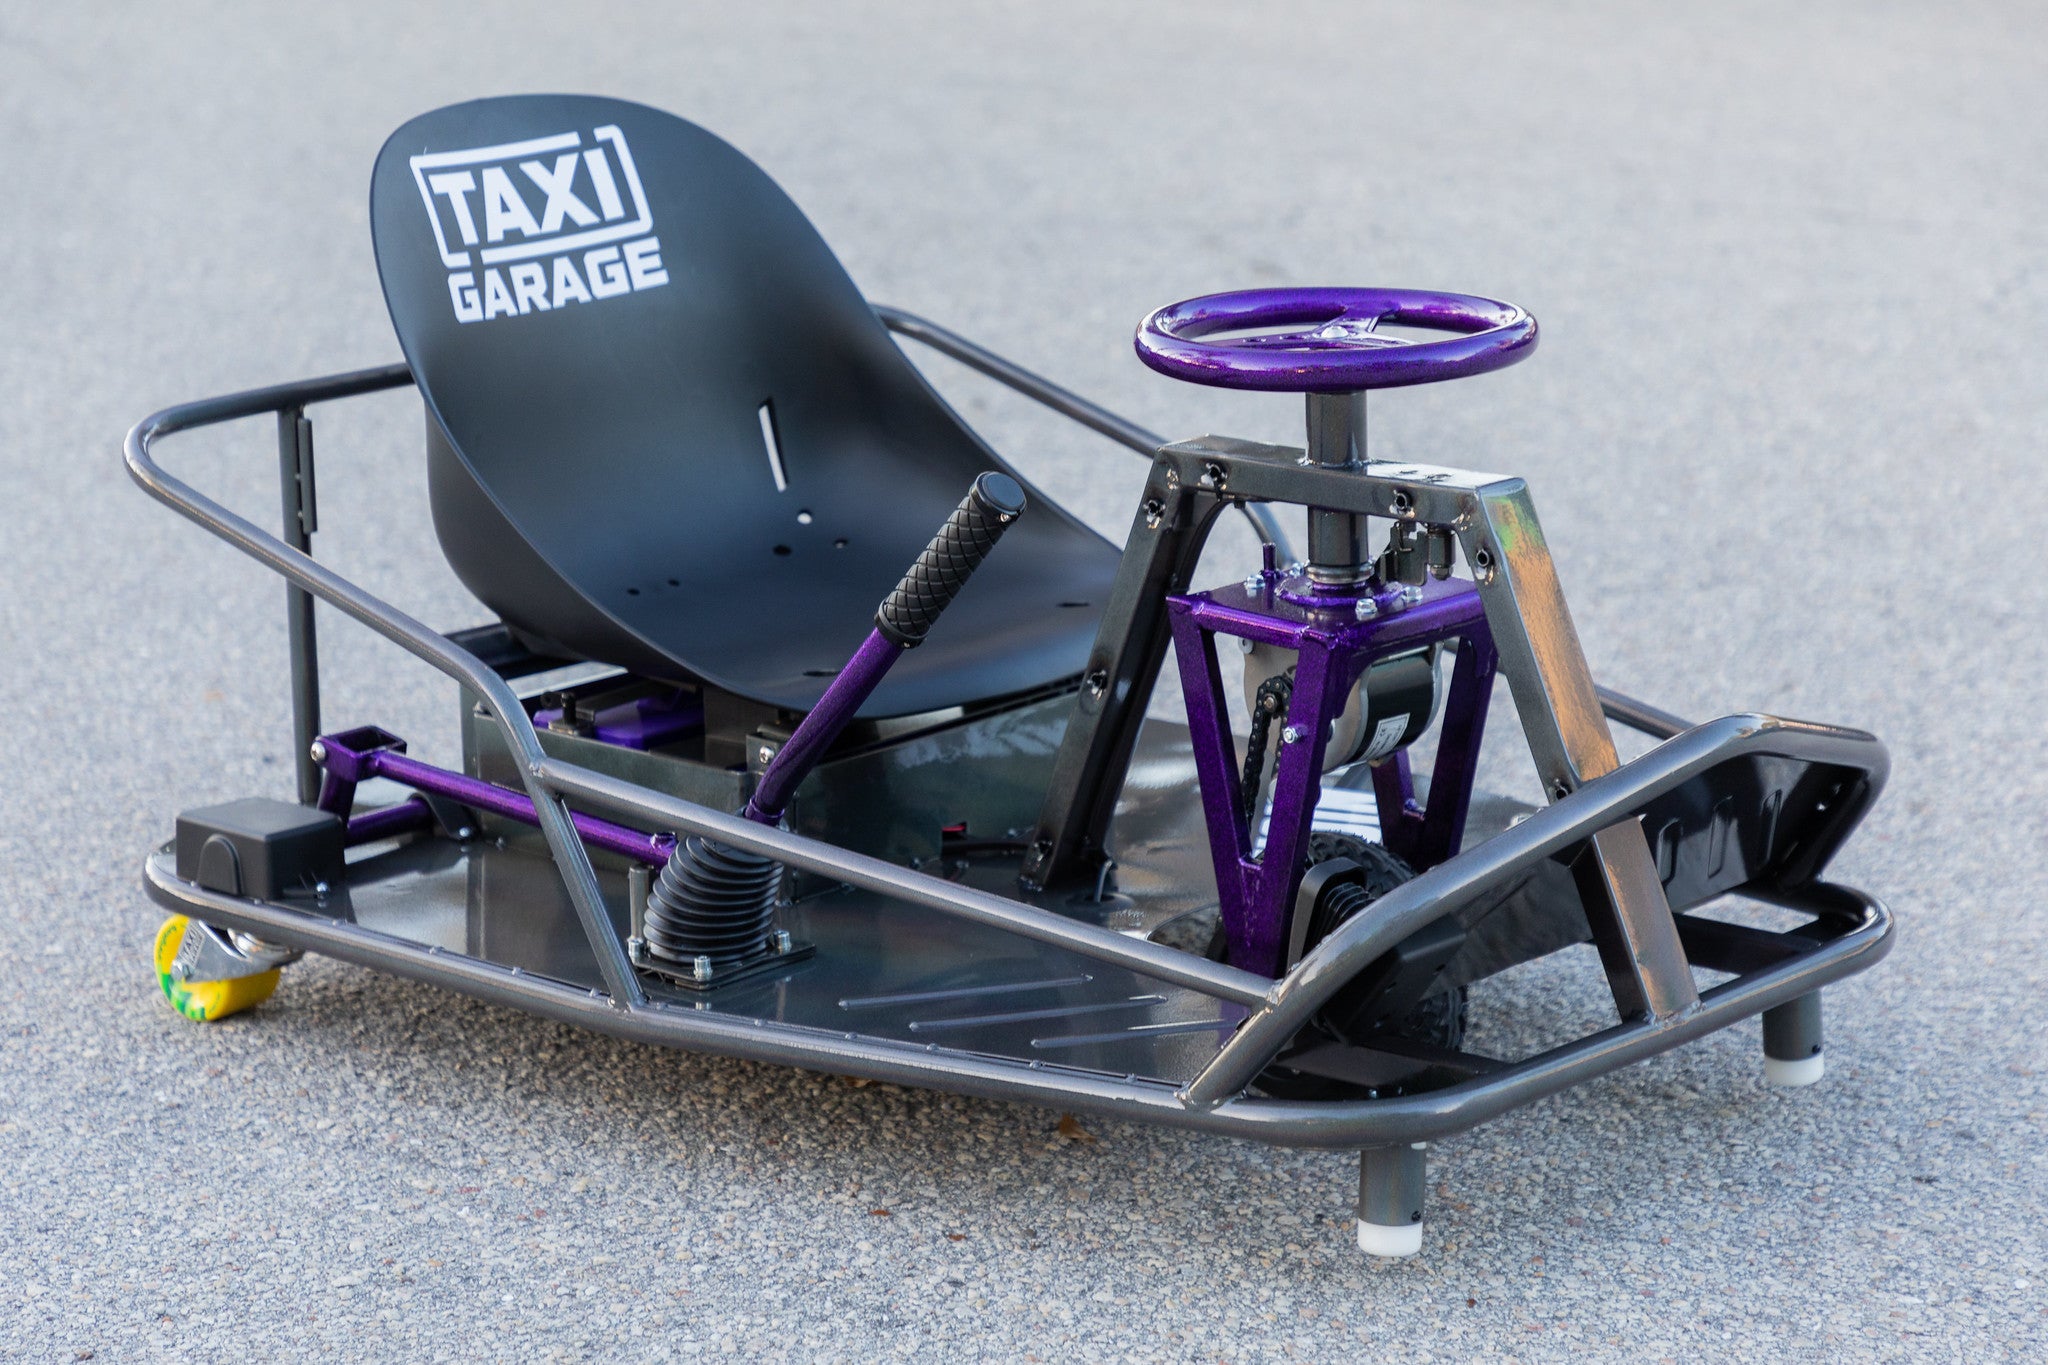 Taxi Garage - Great entry level crazy cart we offer here.